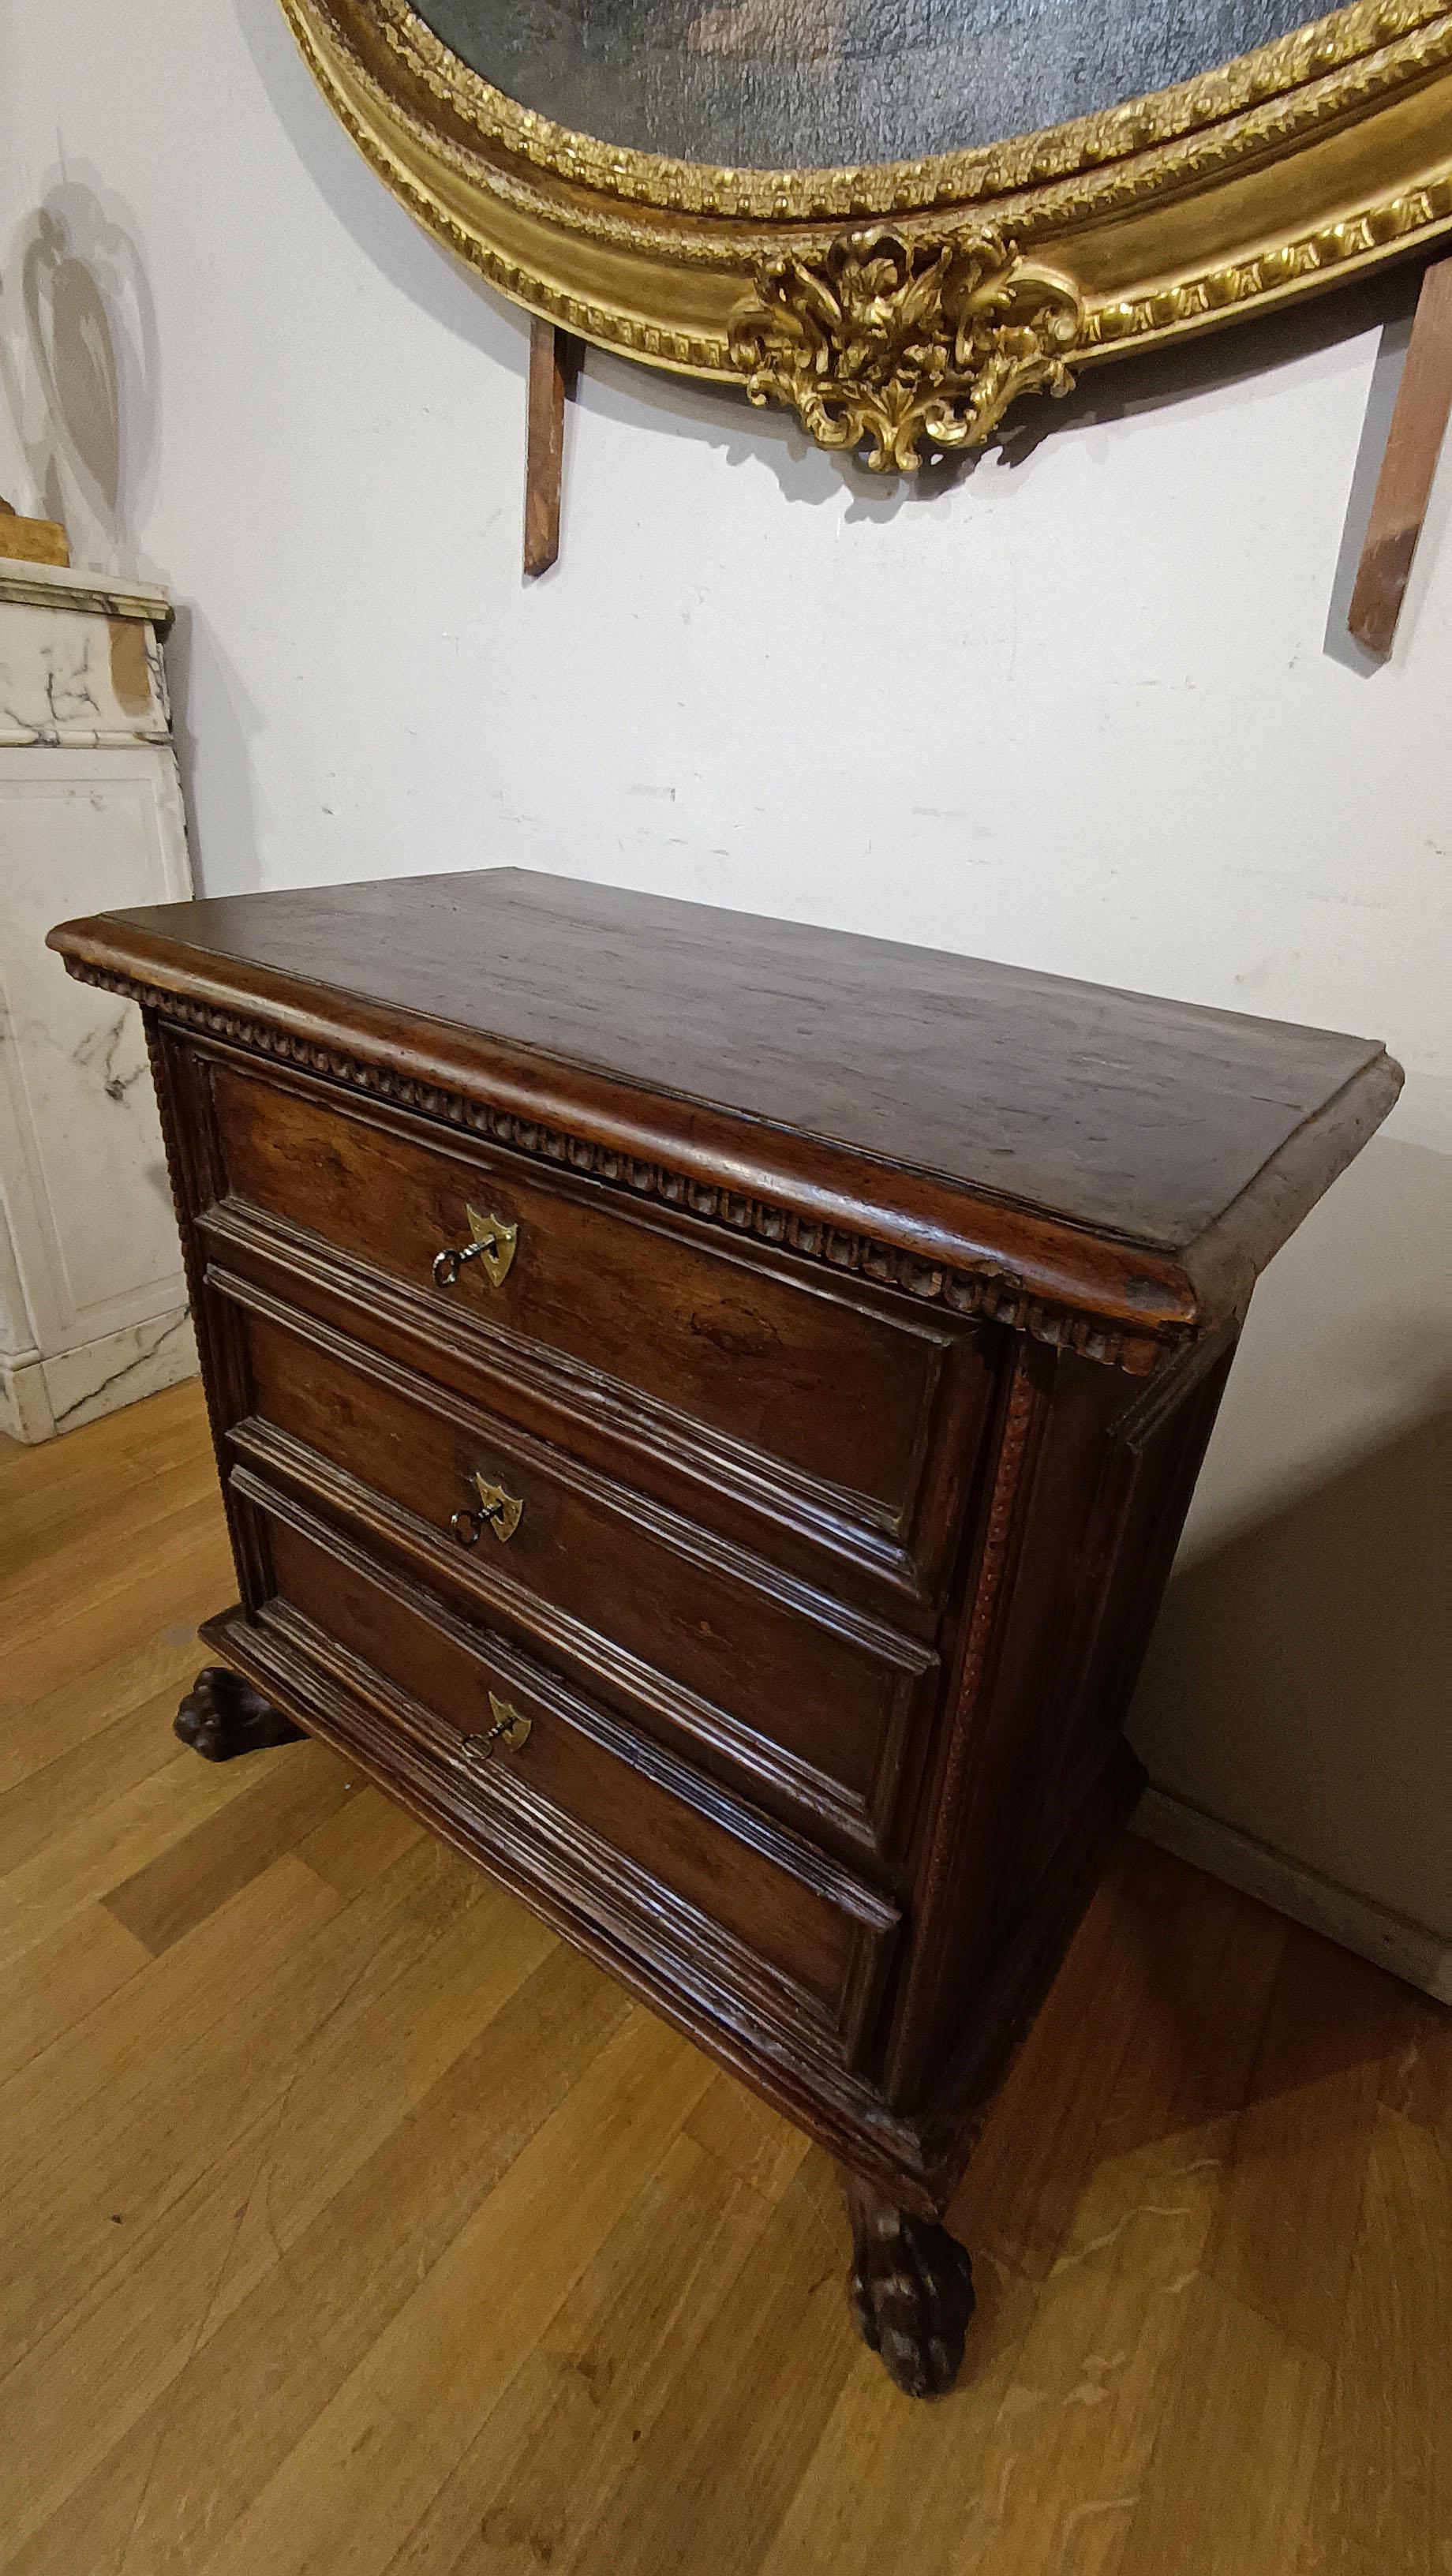 FIRST HALF 17th CENTURY WALNUT CHEST OF DRAWERS For Sale 7